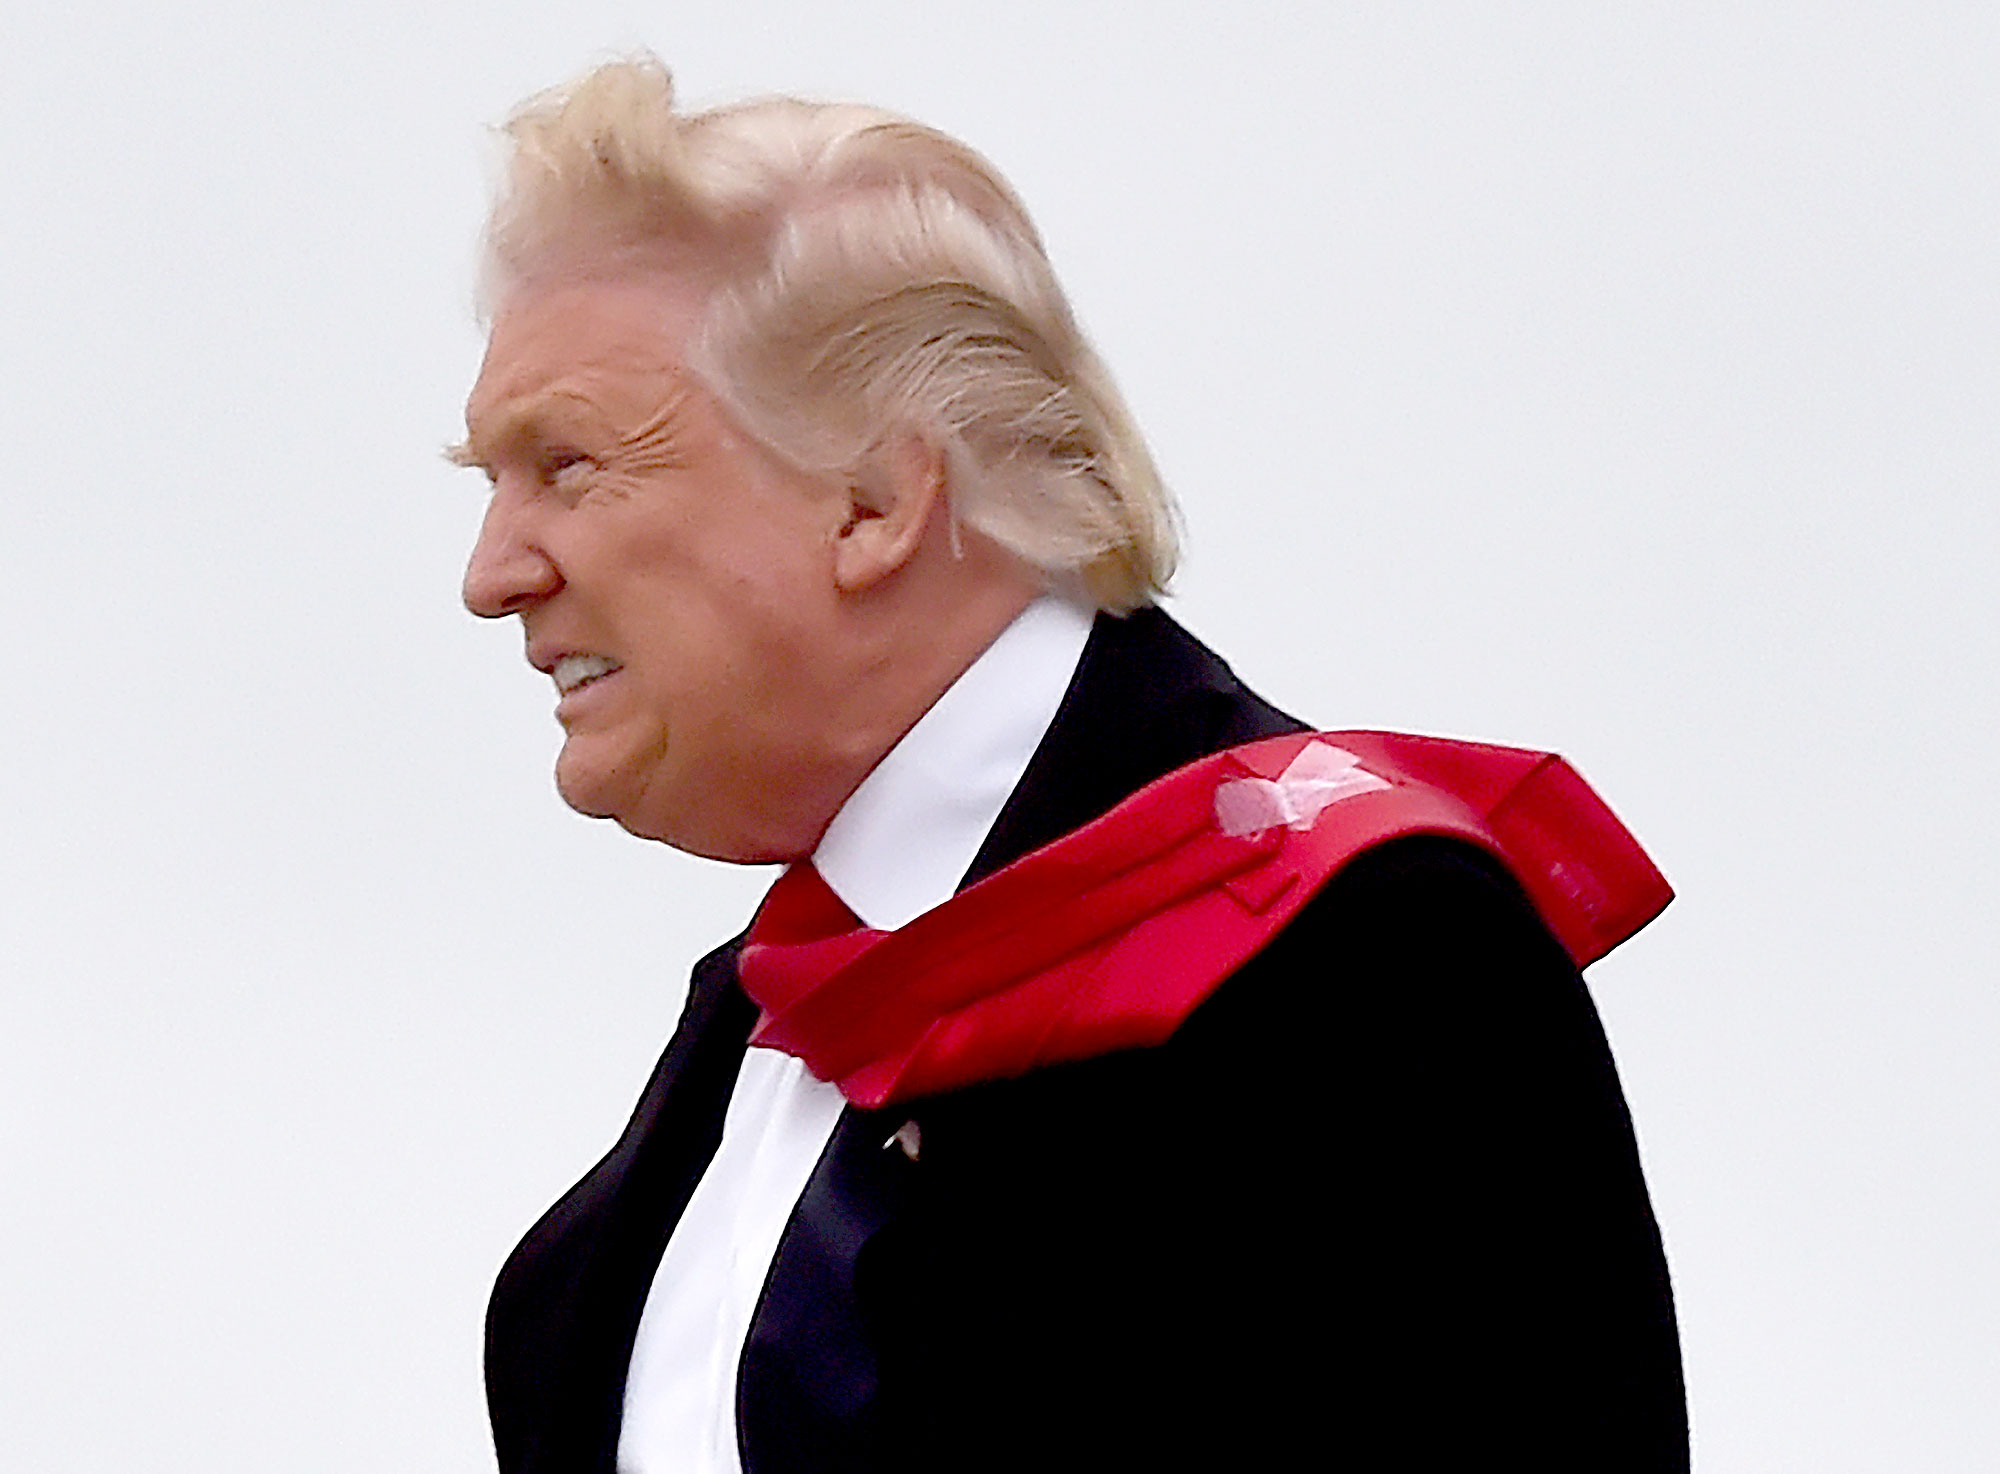 Donald Tie Is Held With Scotch Tape: